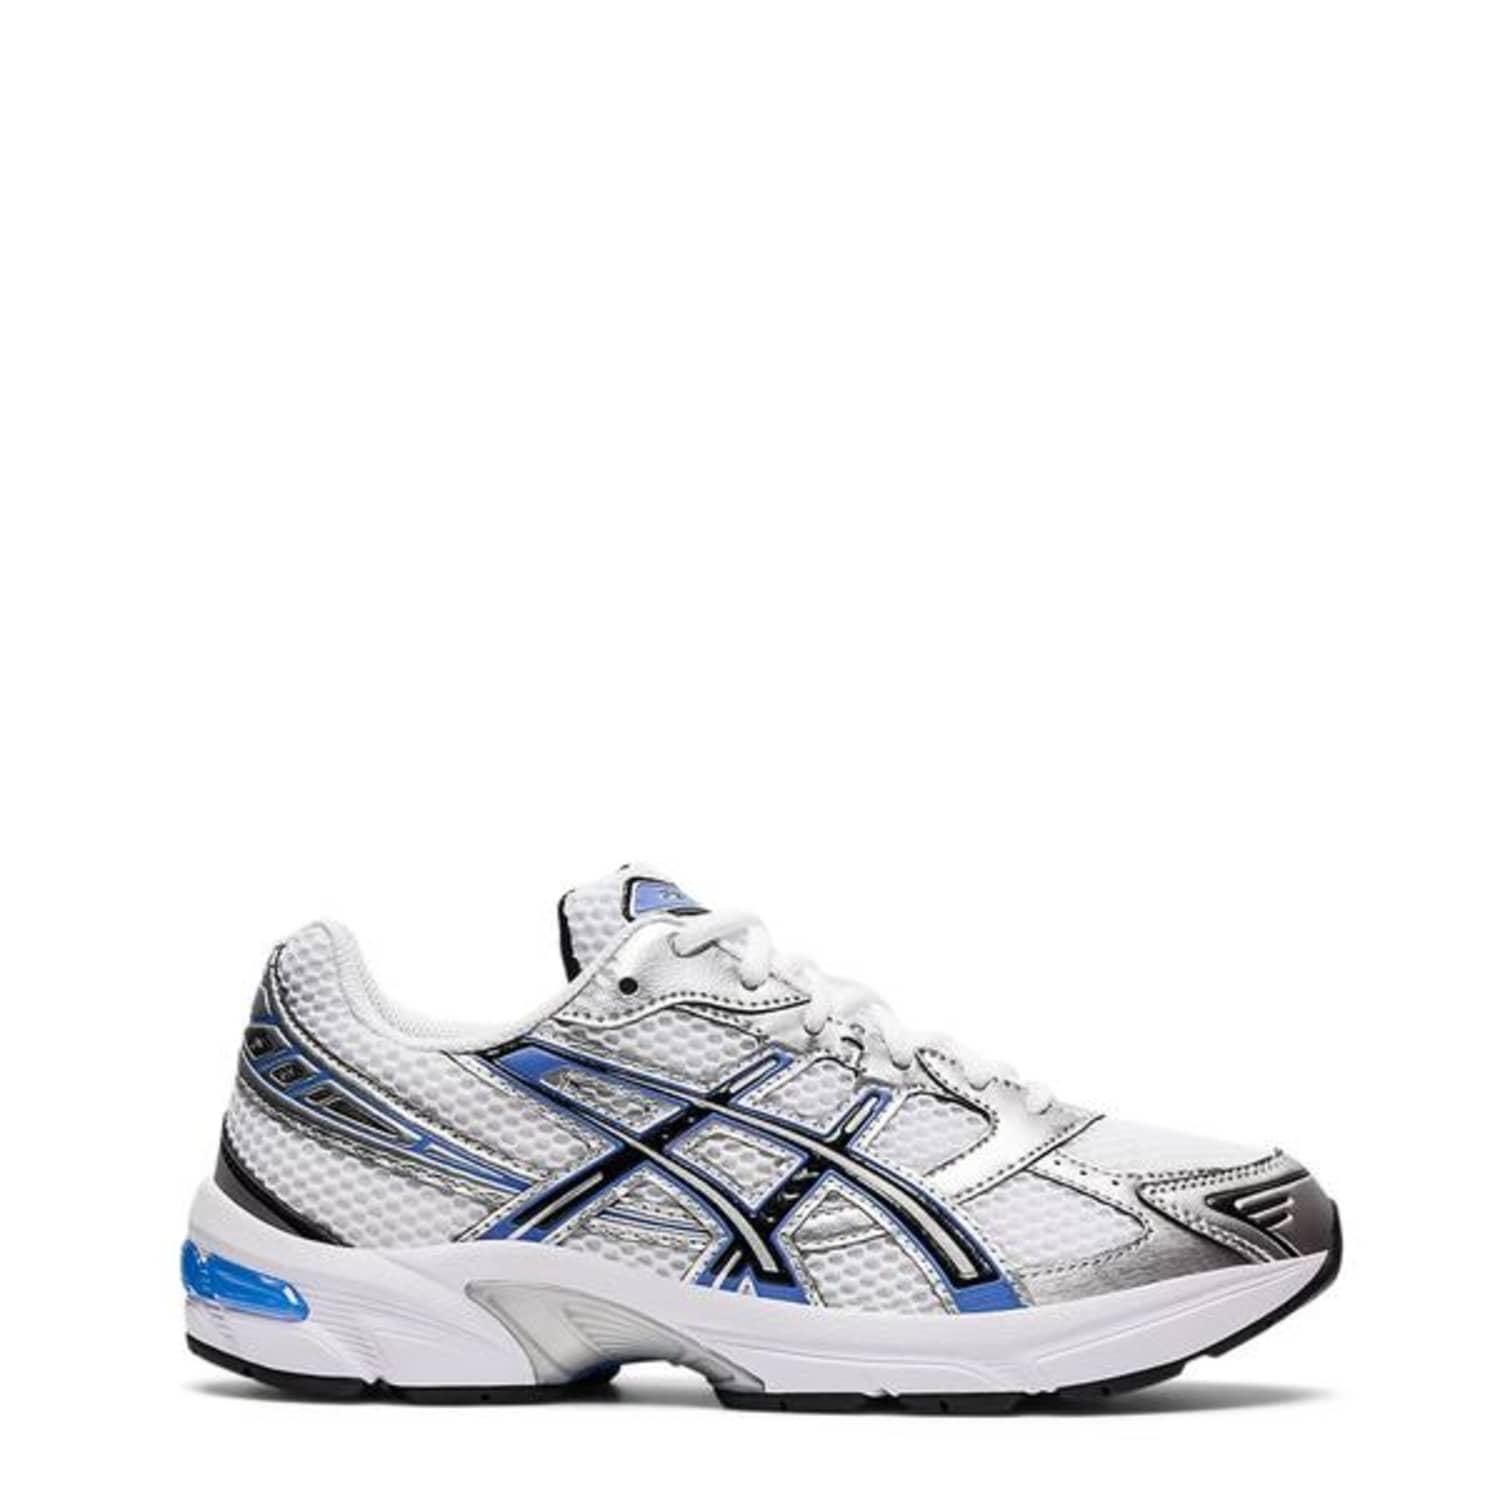 Asics Gel-1130 Trainers White / Periwinkle Blue | Lyst